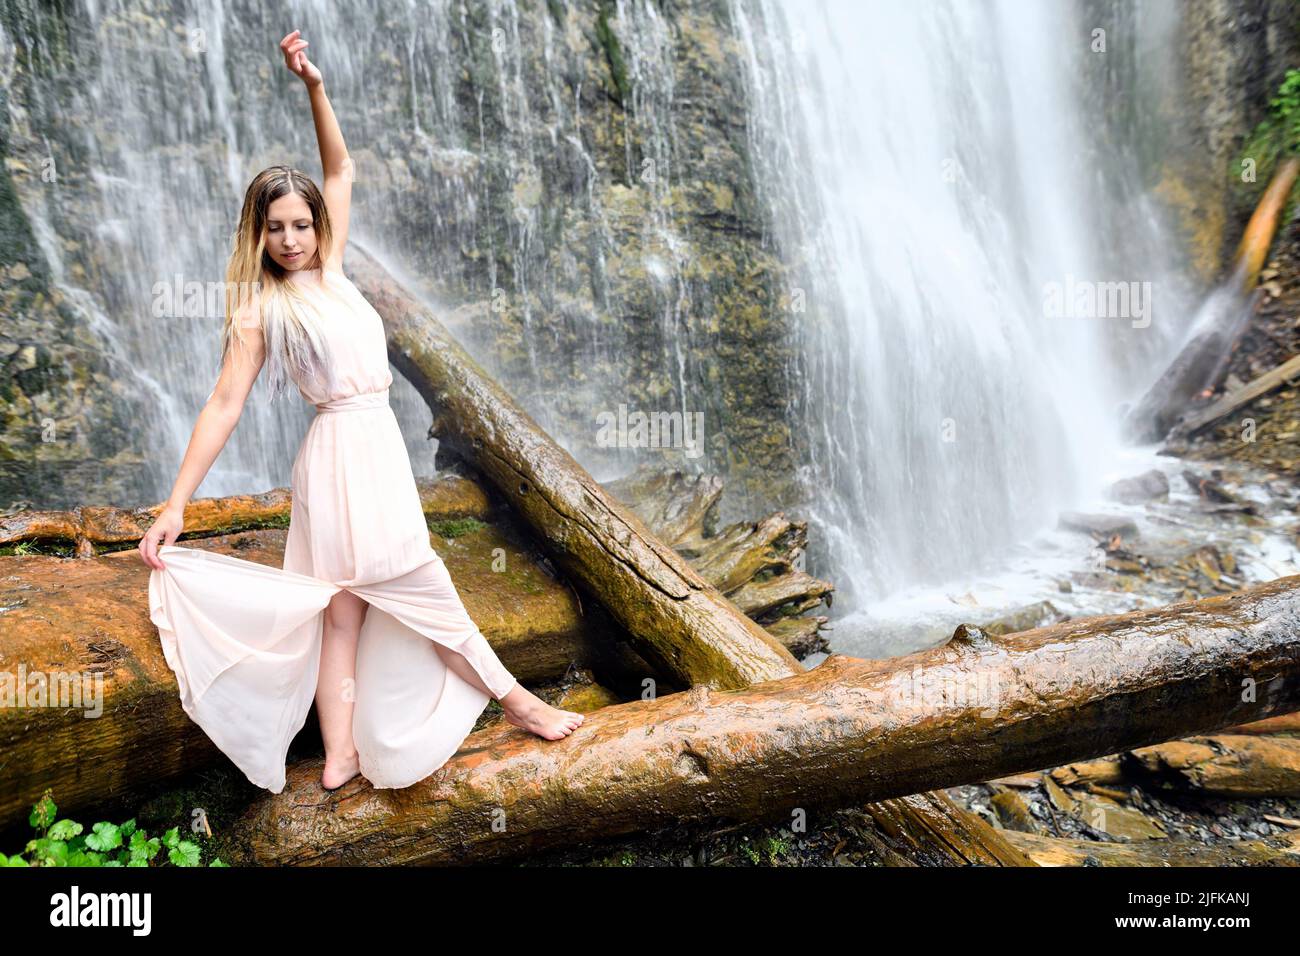 Young woman in pink dress stands barefoot on log, her arms are raised and doing some dreamlike movement and expressing happy feeling at the Bridal Stock Photo